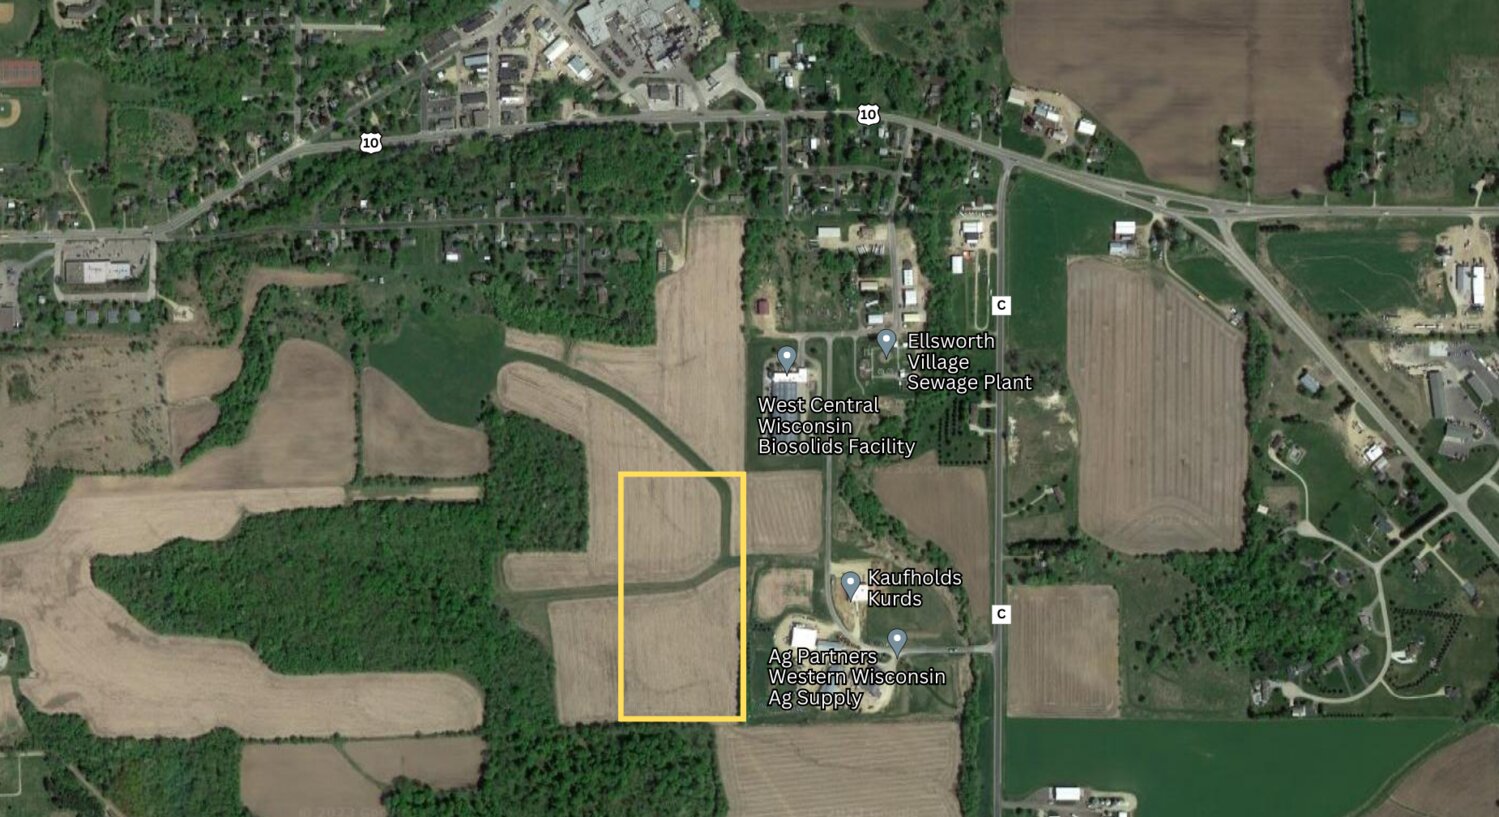 Bigadan is proposing to build an anaerobic digester on 25 acres owned by Ellsworth Cooperative Creamery near County Road C in Ellsworth.